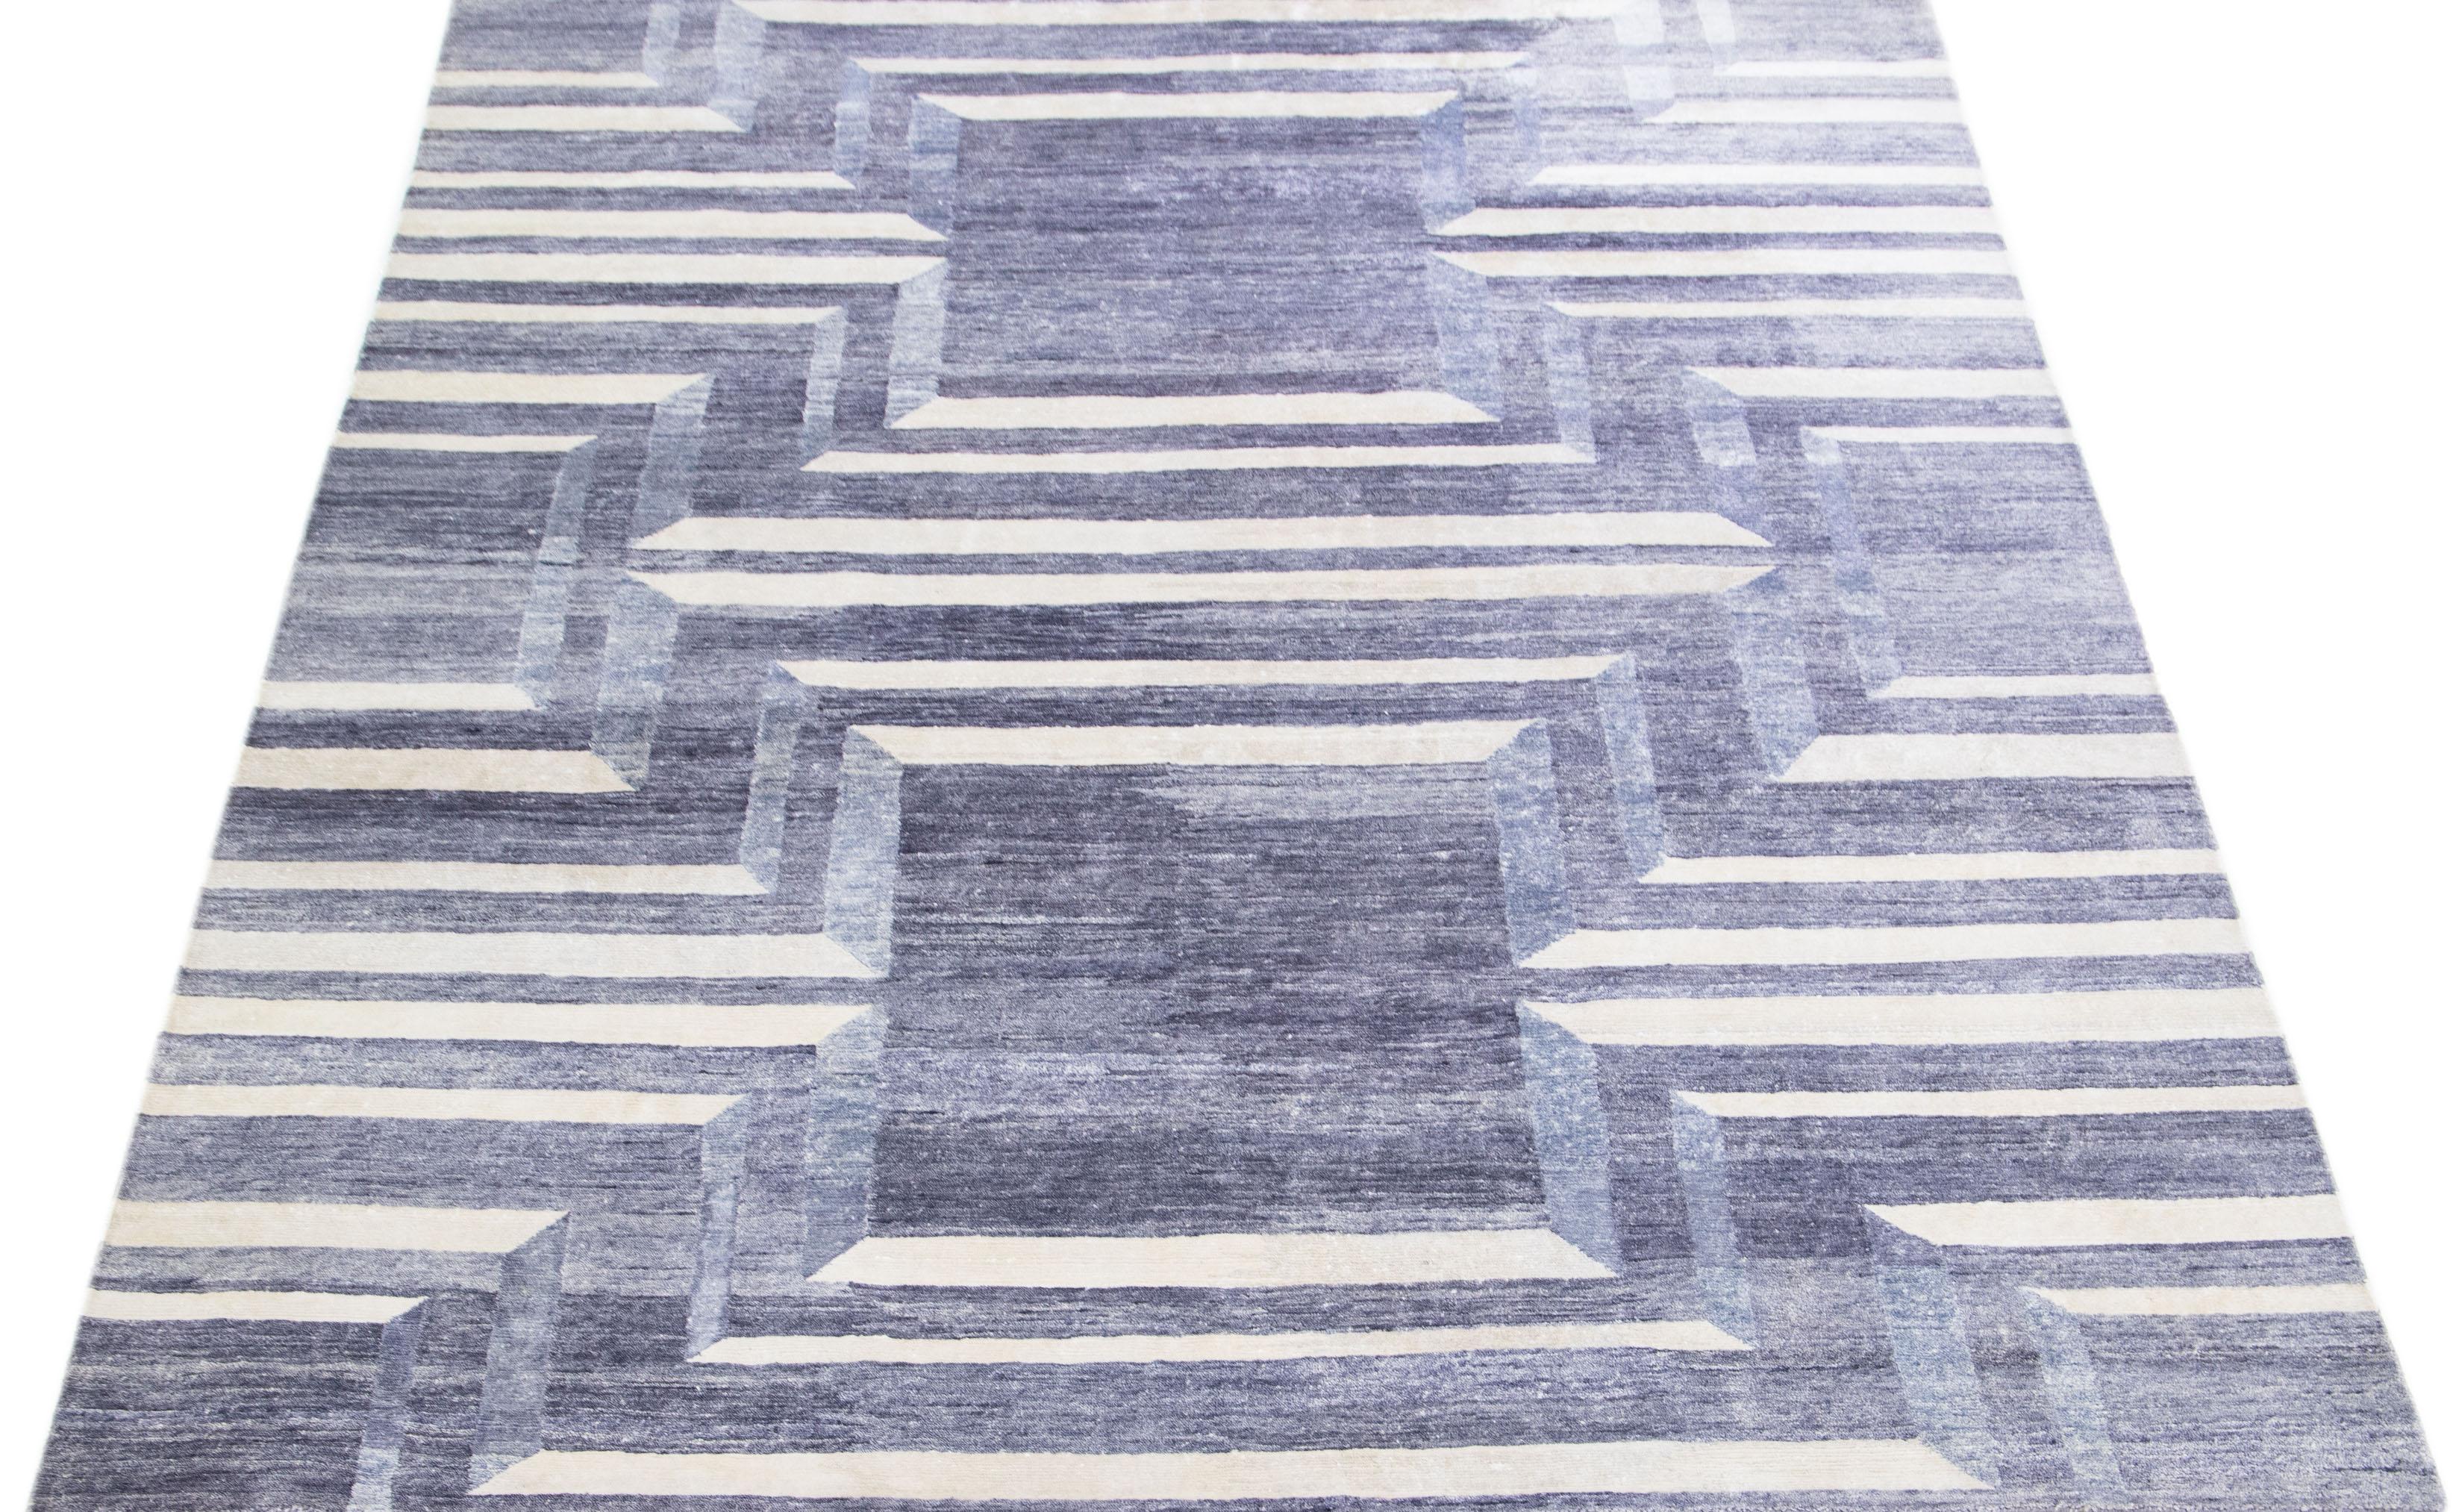 This wool and silk rug boasts a striking contemporary design featuring a captivating geometric motif in an elegant grey hue. The exquisite ivory accents perfectly complement the distinct abstract pattern, lending an alluring touch of glamour that